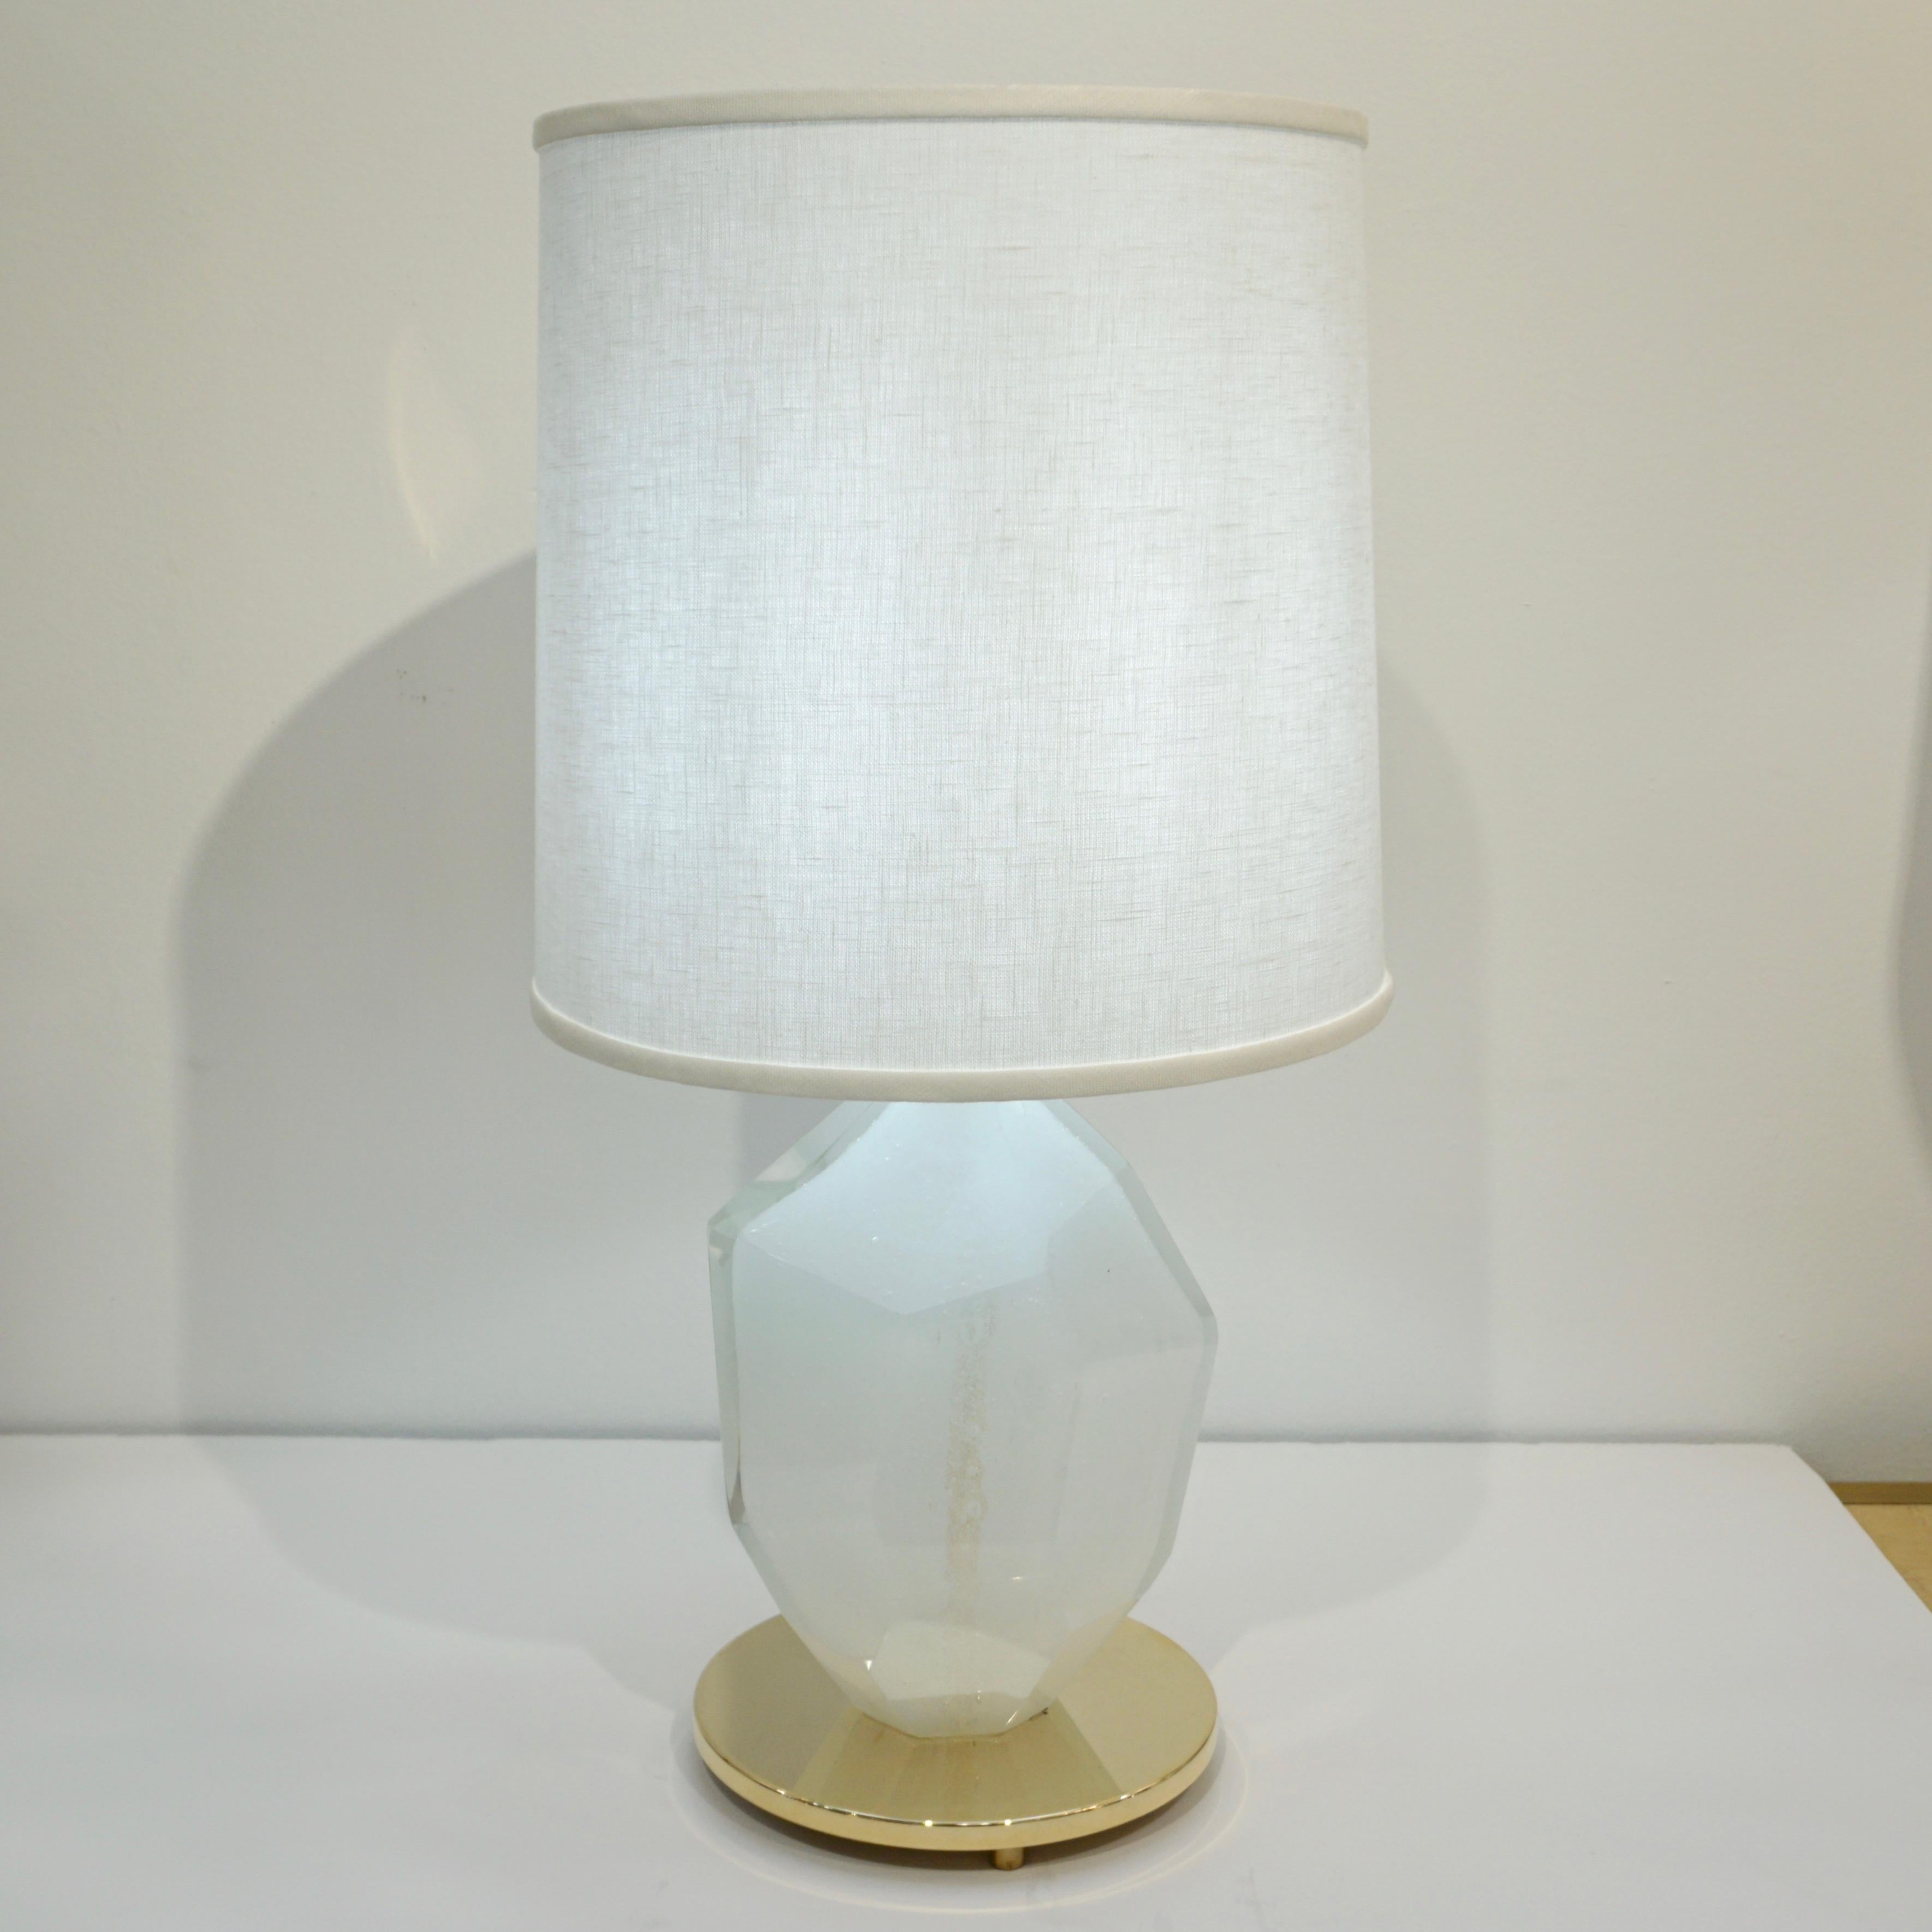 Contemporary made in Italy pair of table lamps, of organic design, signed by Alberto Donà Studio, high quality of execution, entirely handcrafted and hand polished. The heavy solid Murano glass bodies are worked in Pulegoso: lots of tiny air bubbles